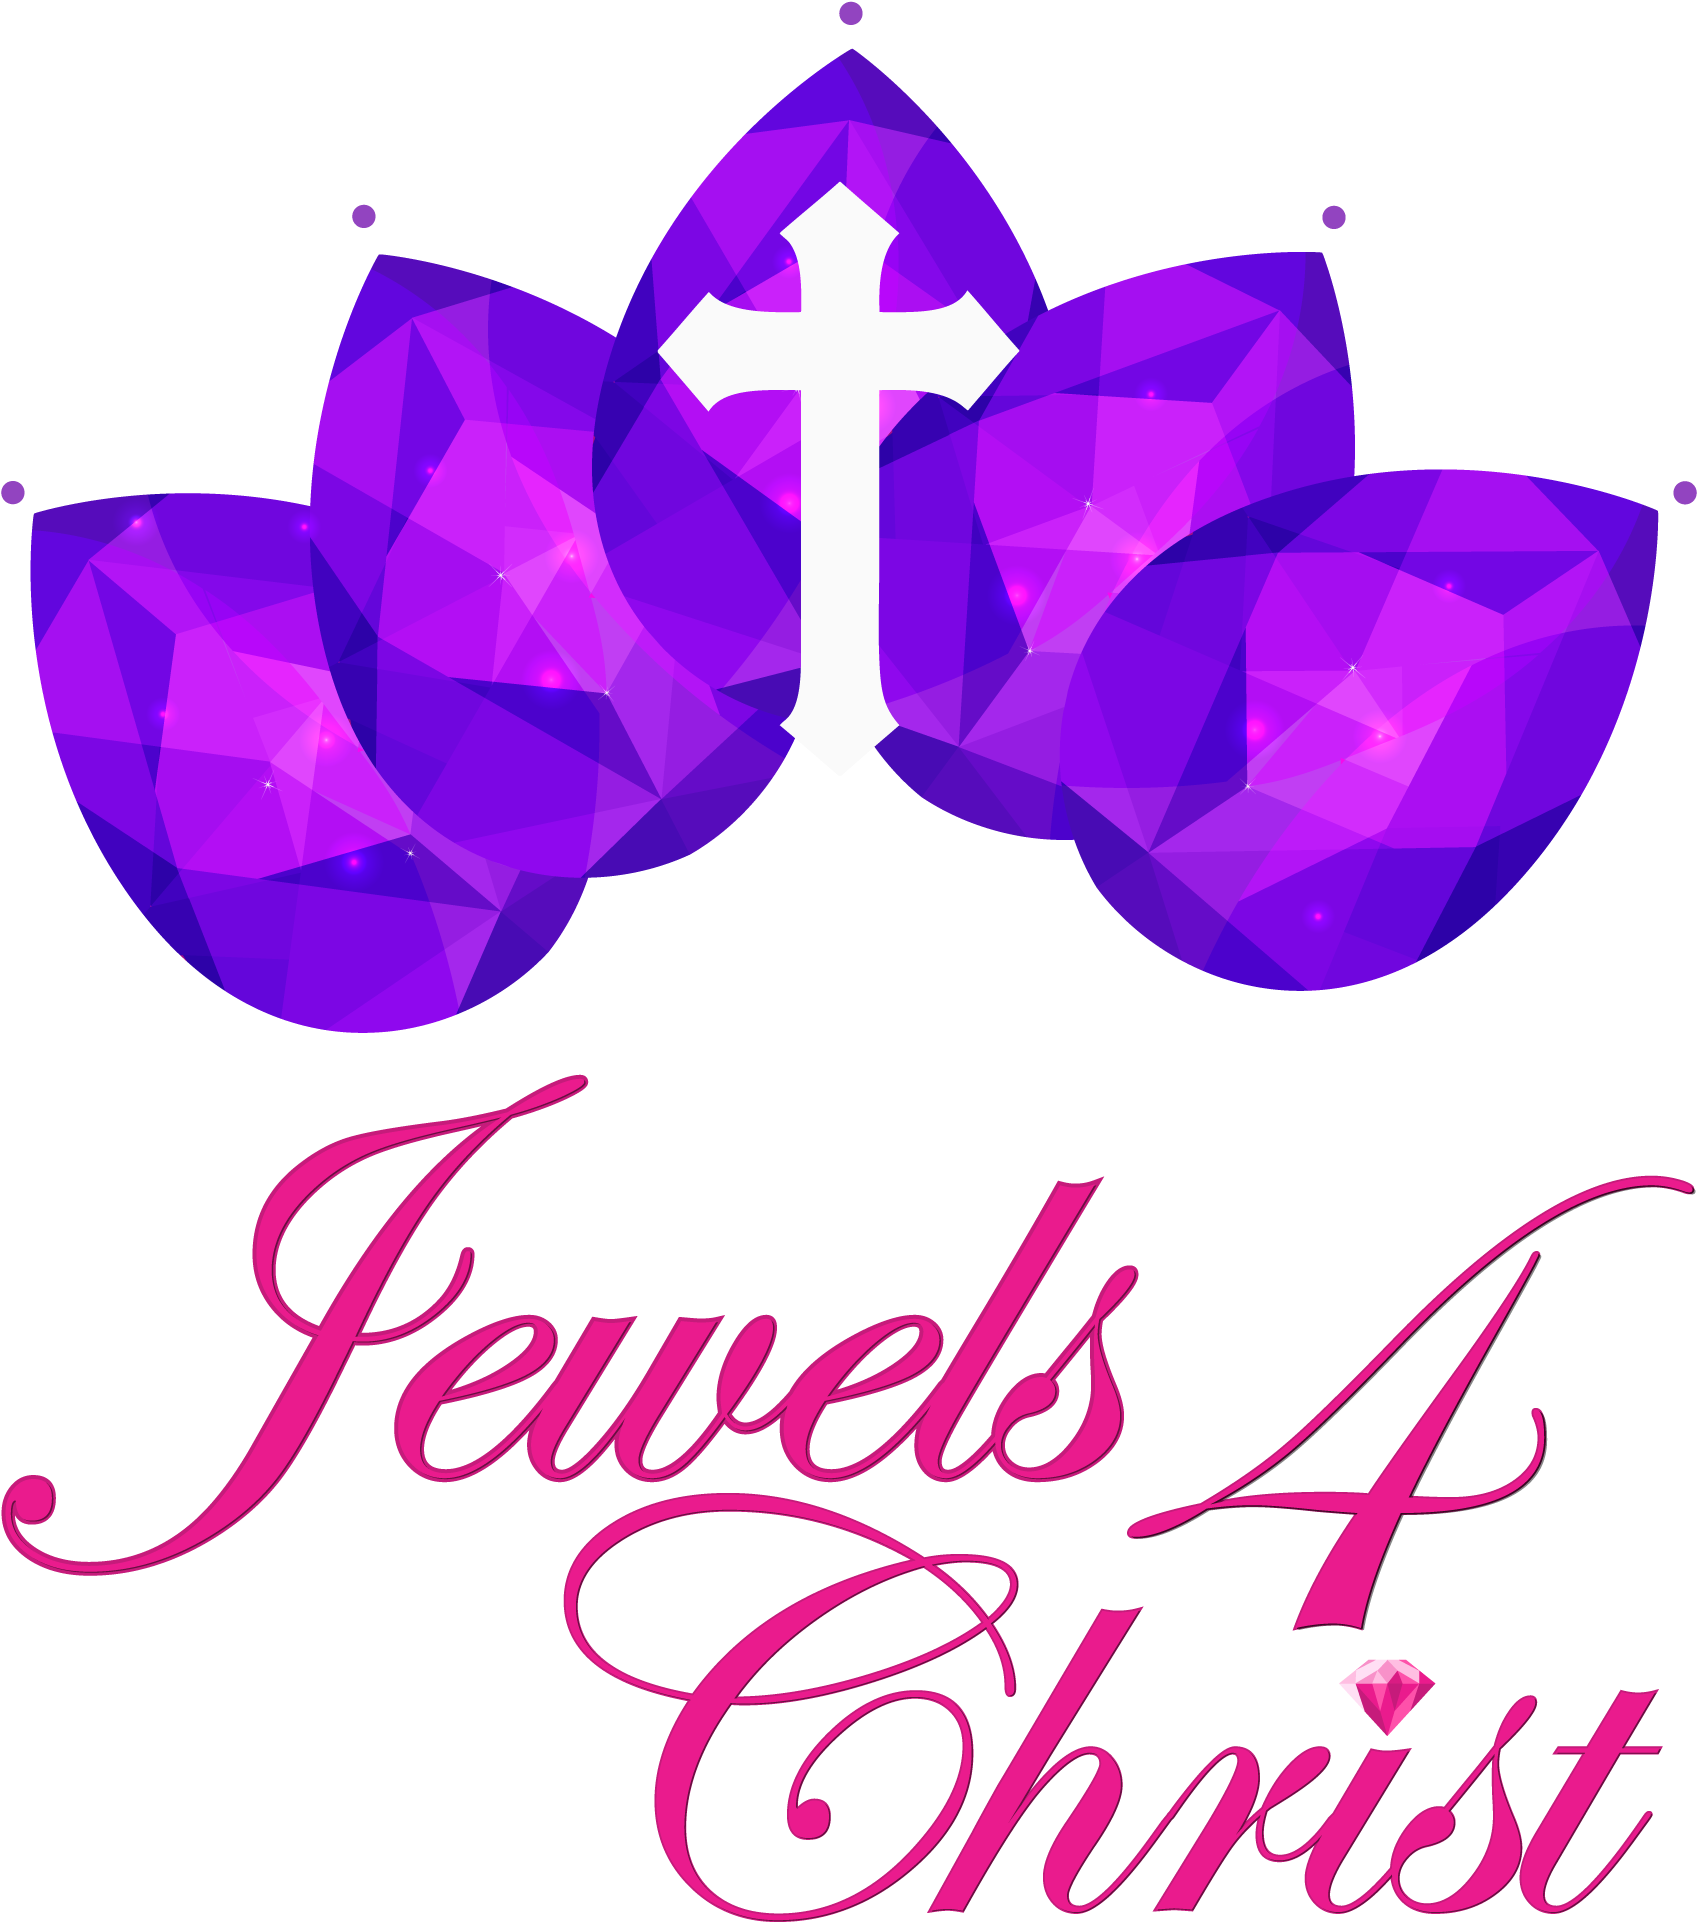 Jewels 4 Christ Is An Organization Designed To Educate - Drew's Famous Christmas Favorites (2000x2000)